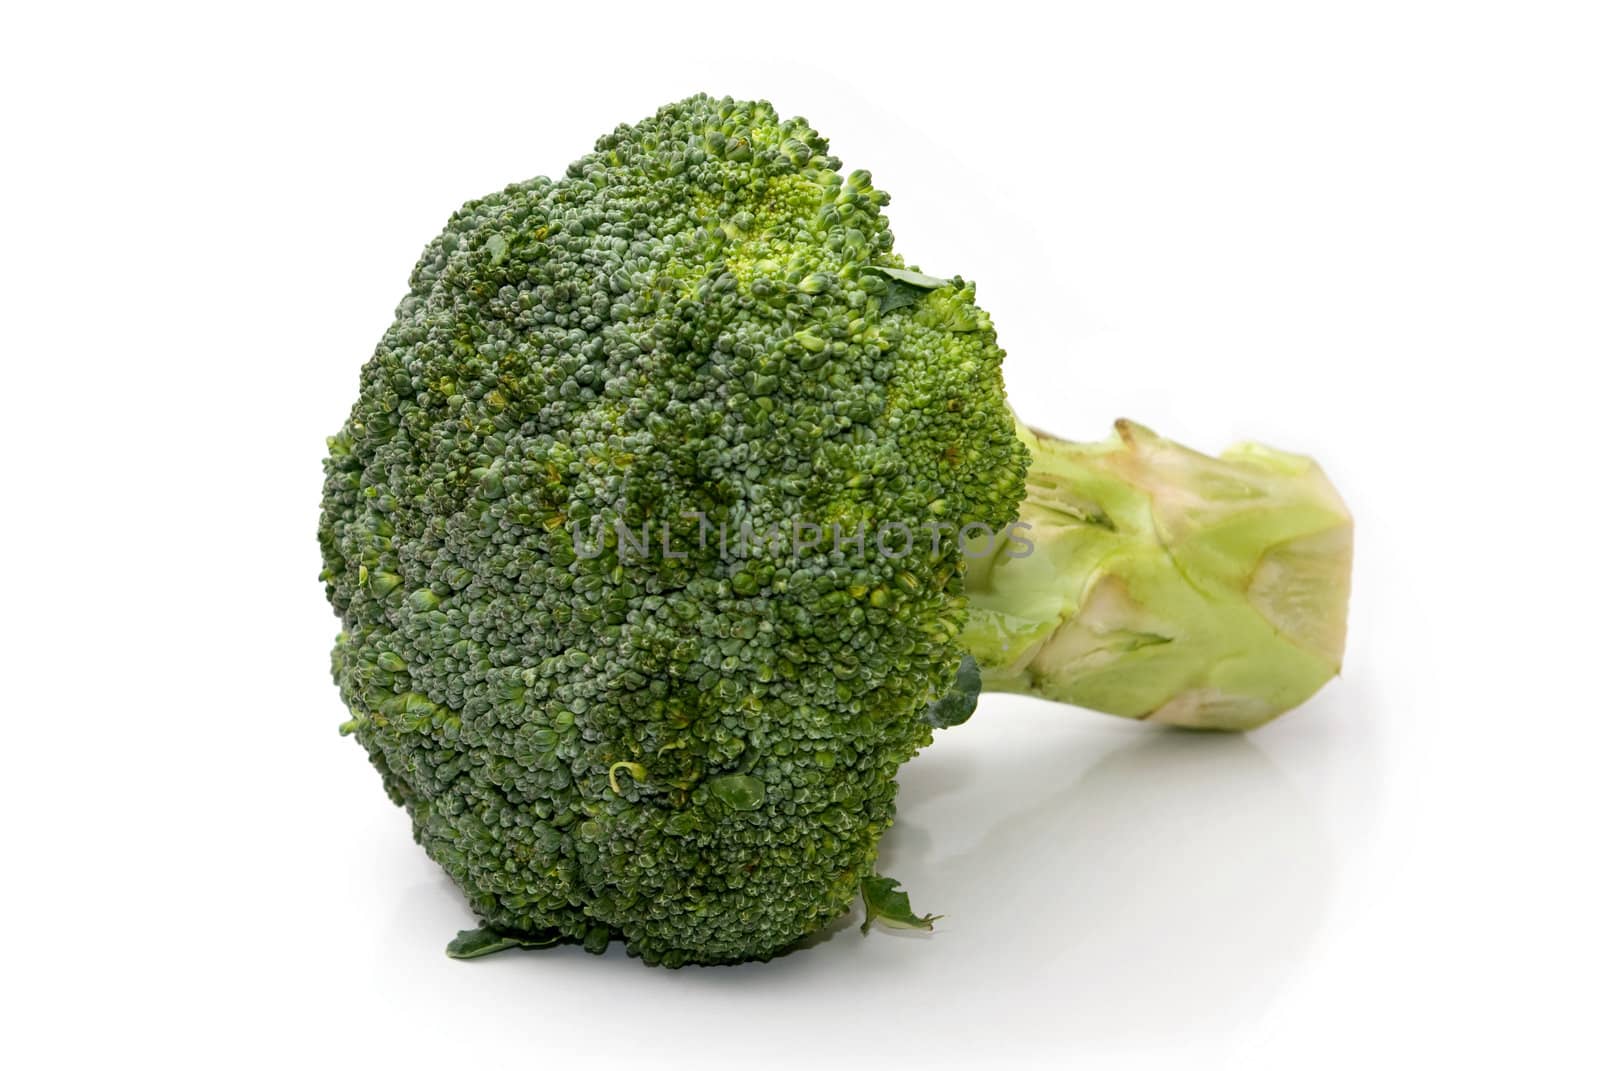 Green broccoli isolated on white background.